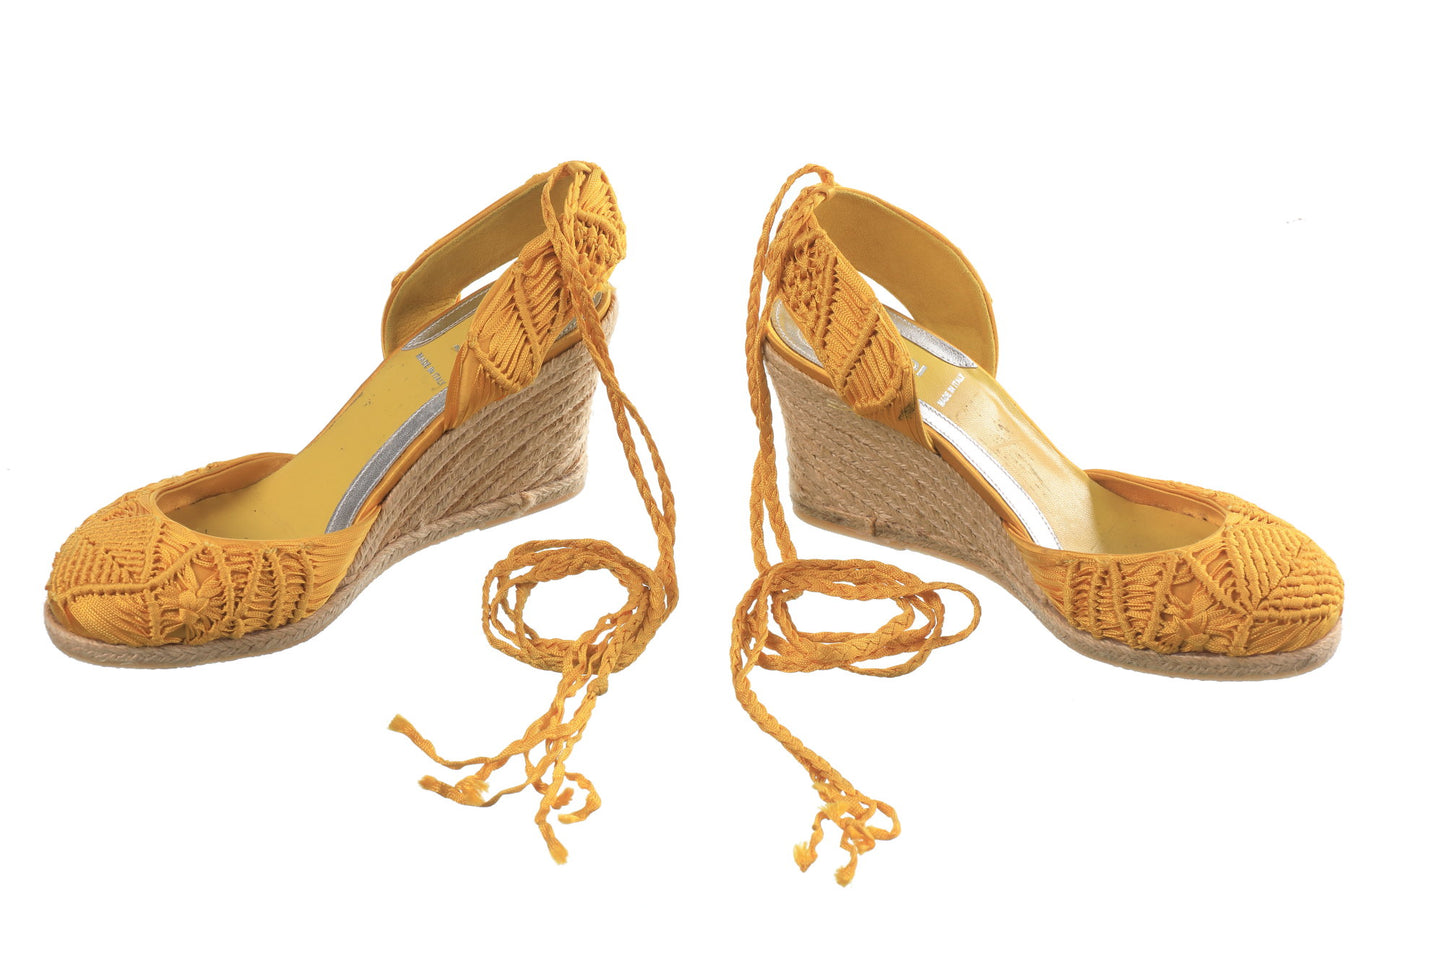 Fendi espadrilles with rope sole and heel